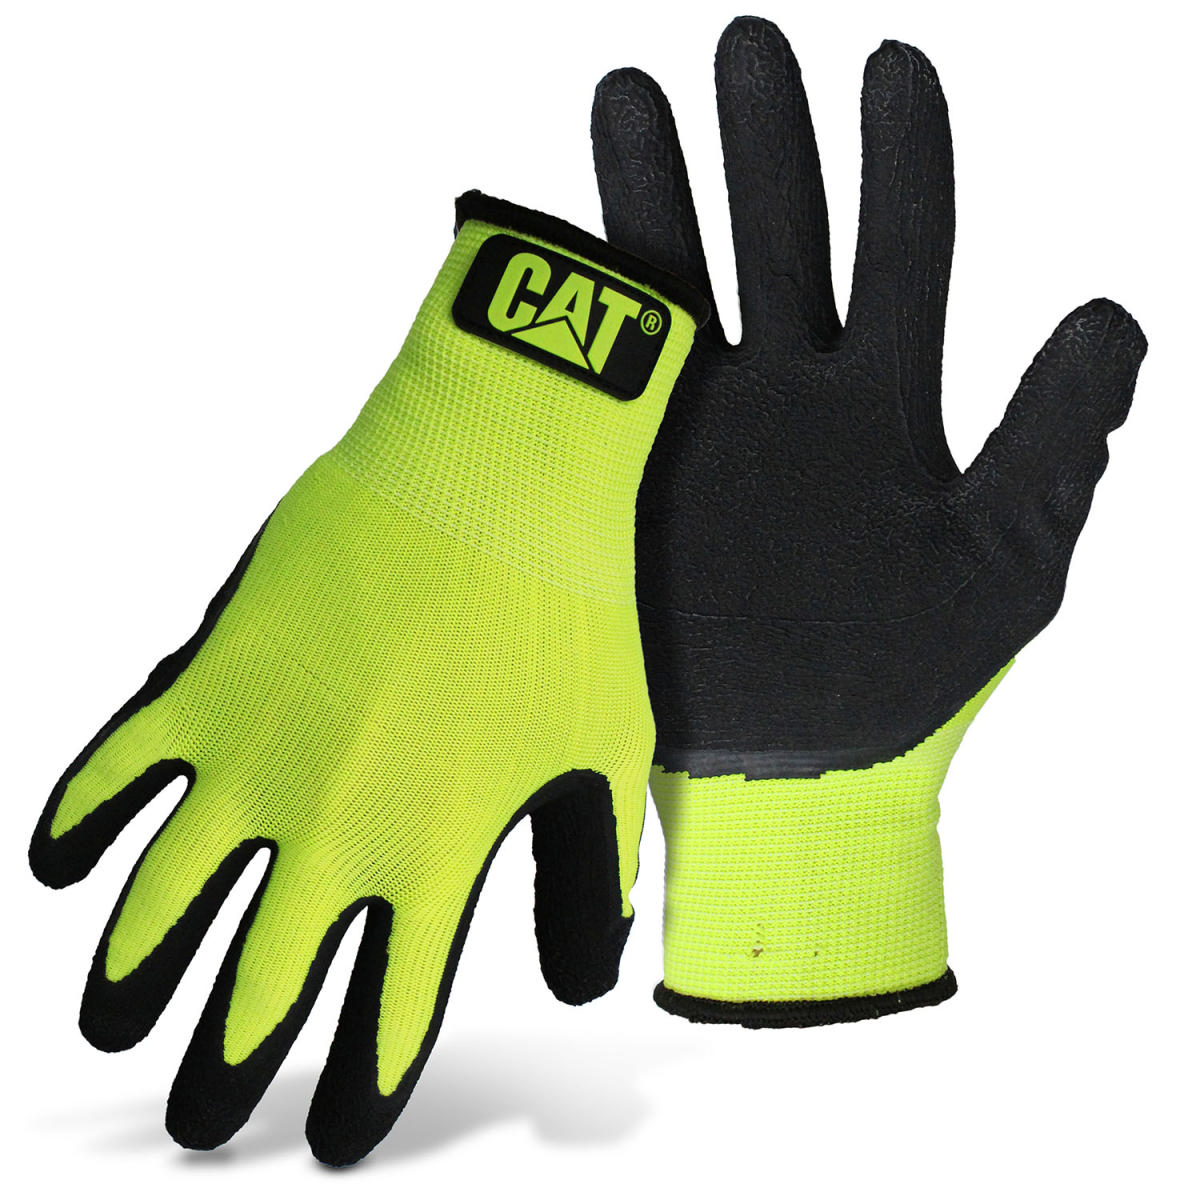 CAT HI VIS POLYESTER KNIT LATE